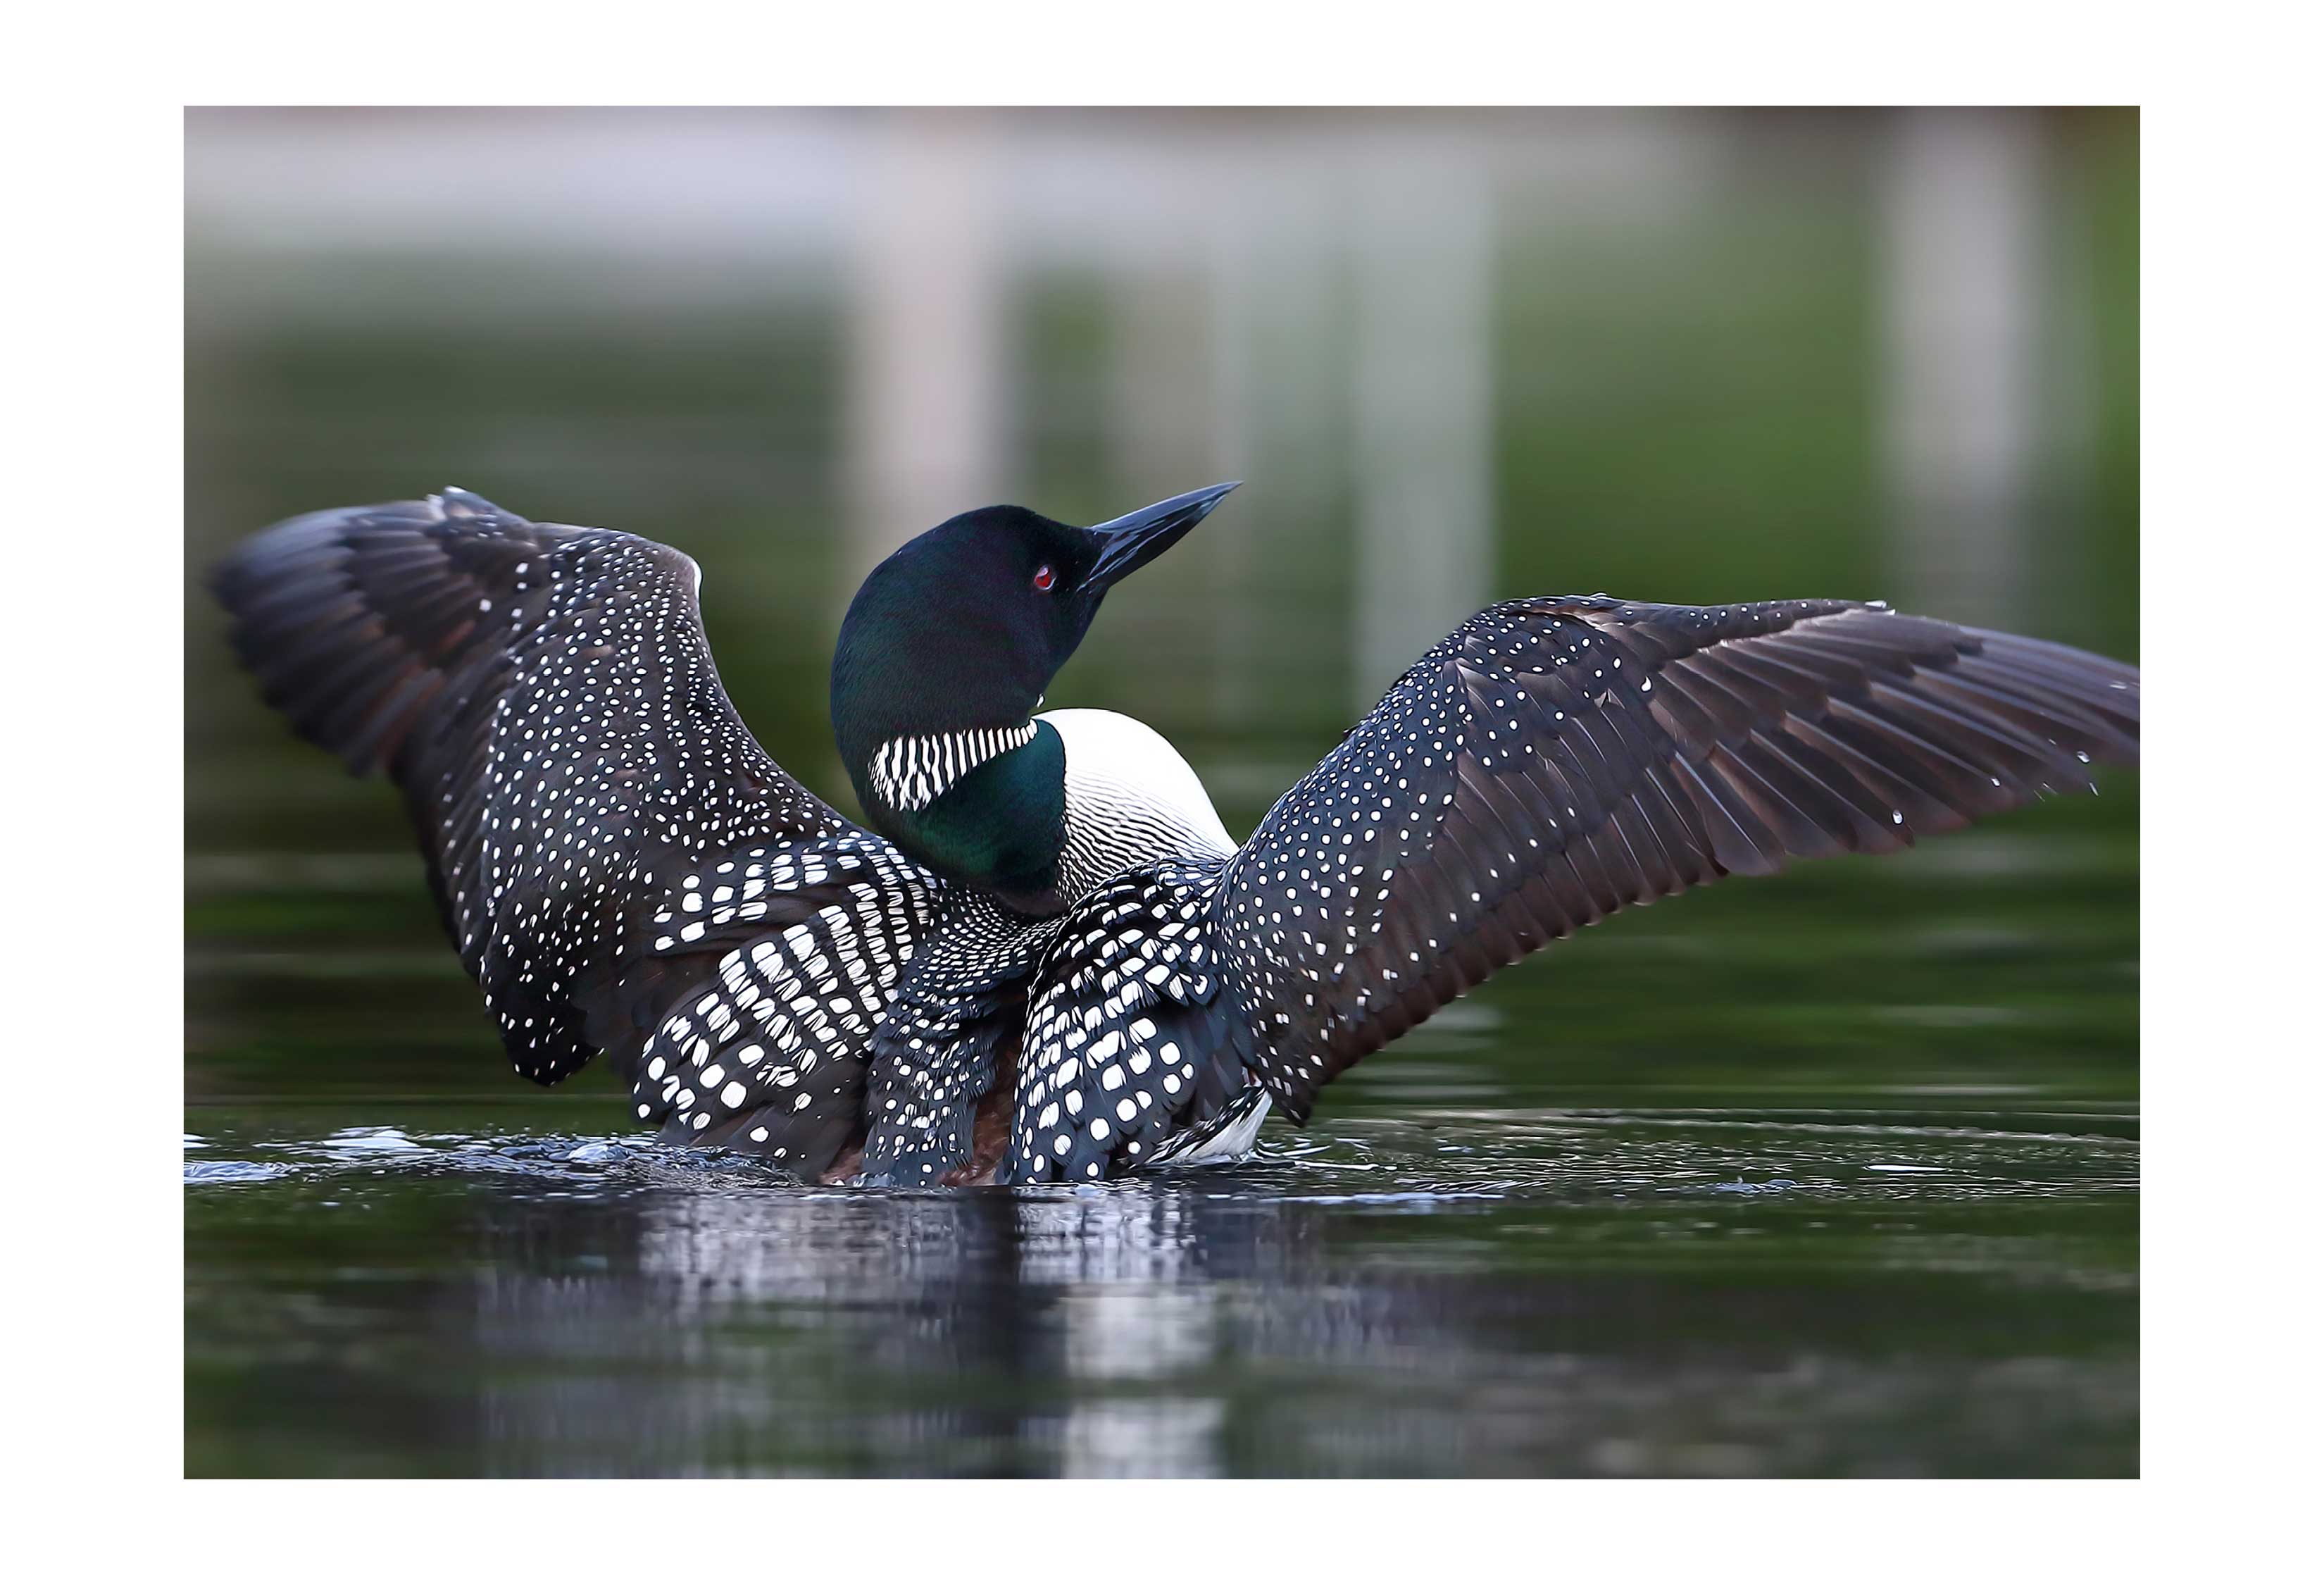 A common loon in the water.